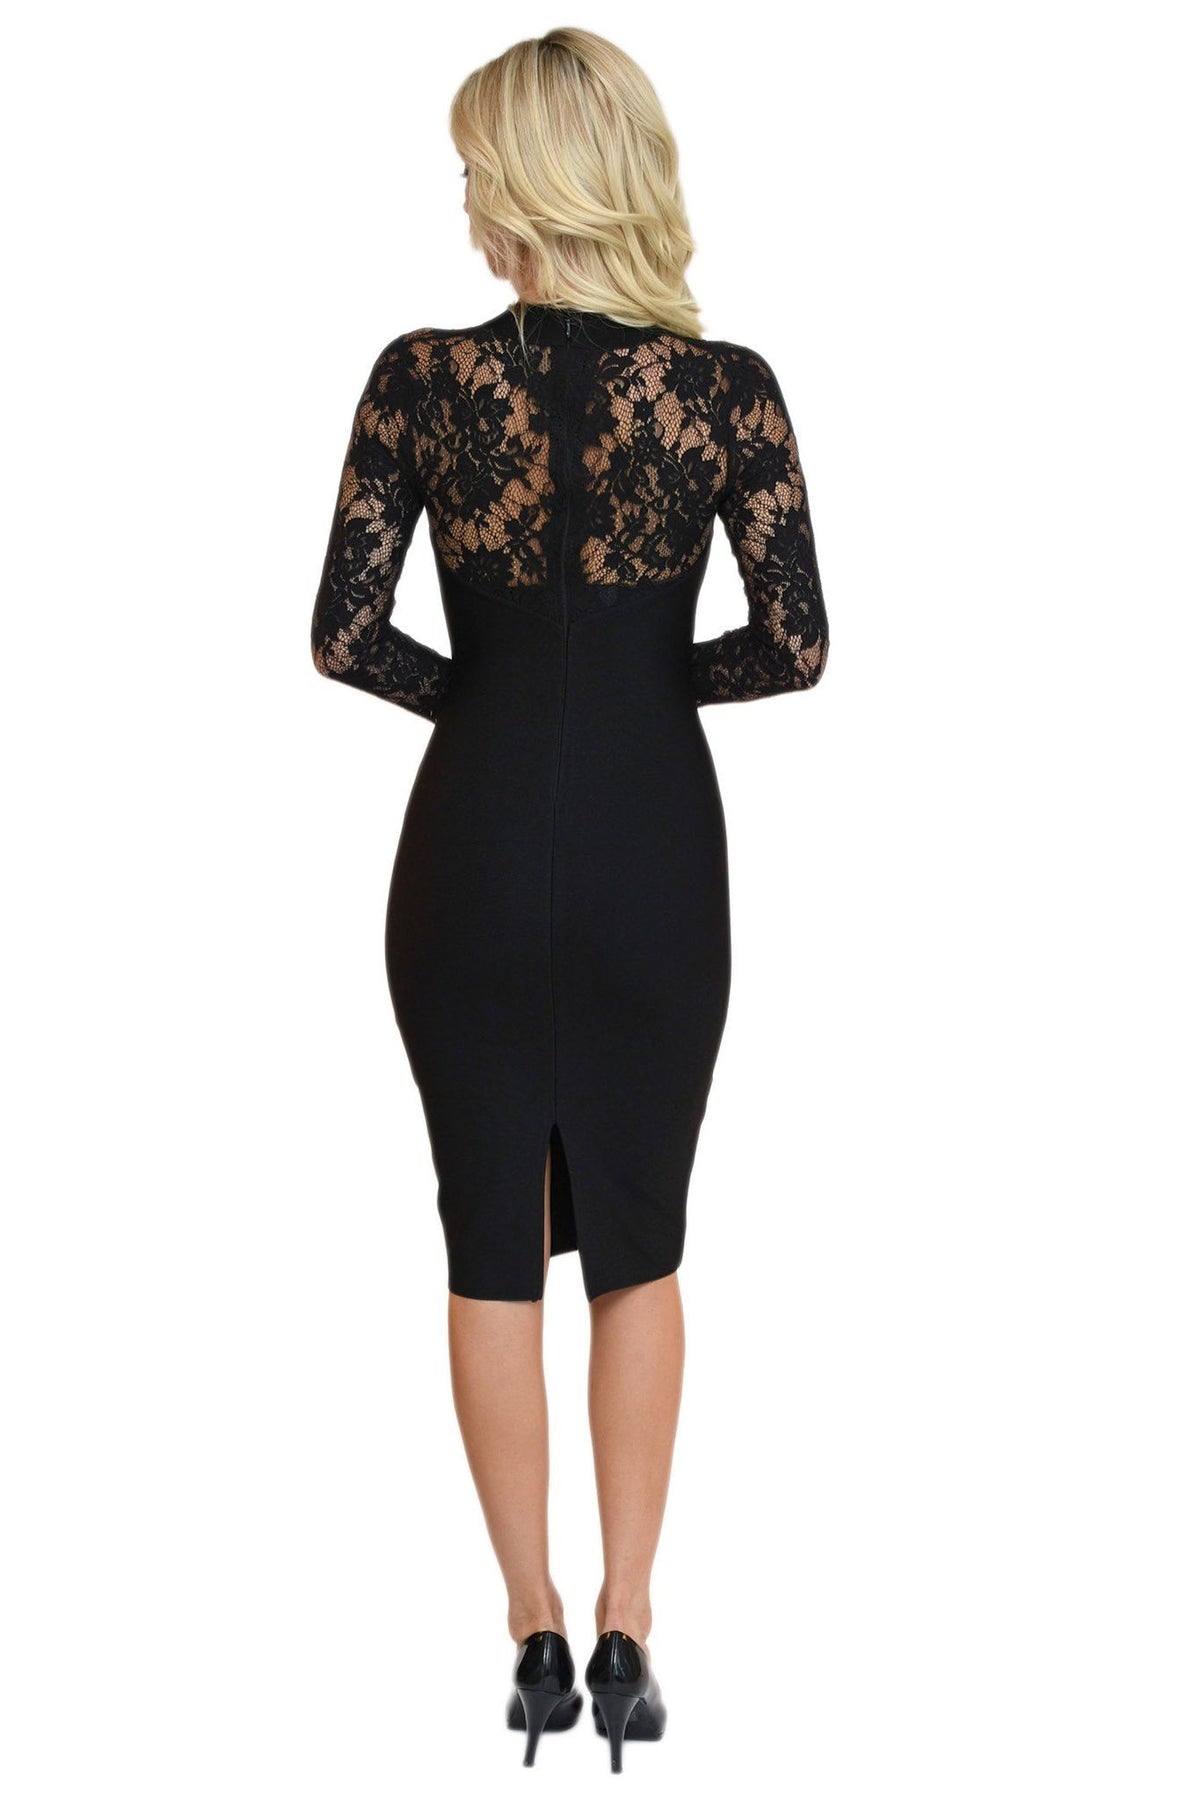 Back of black midi bodycon long sleeve bandage dress featuring sweetheart neck, lace sleeves, turtleneck and sheer lace details at the back